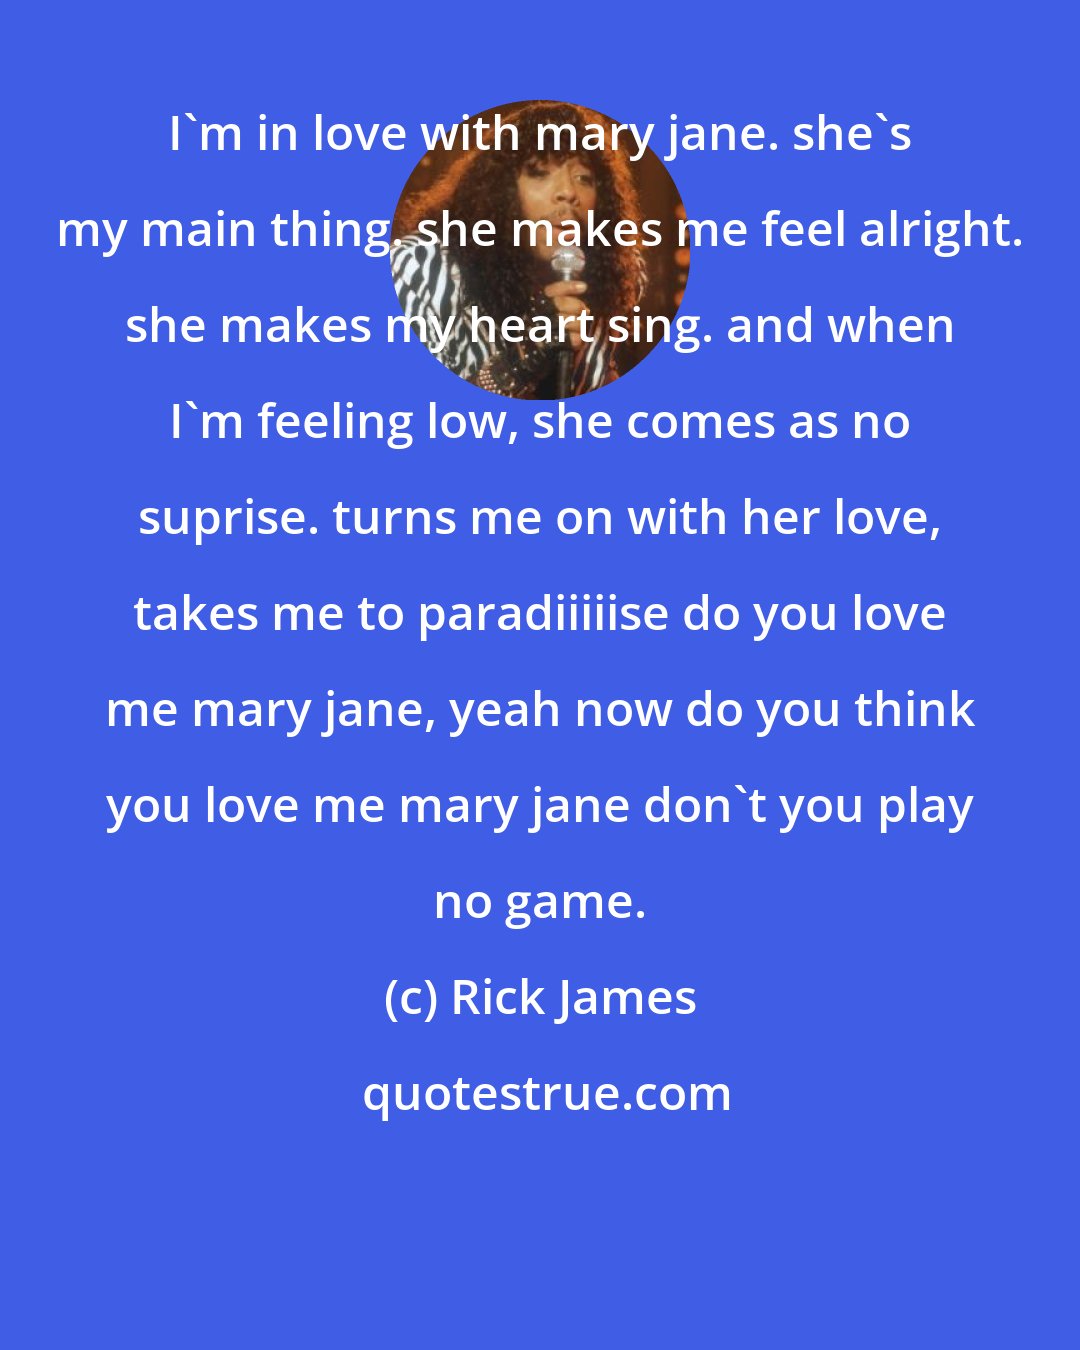 Rick James: I'm in love with mary jane. she's my main thing. she makes me feel alright. she makes my heart sing. and when I'm feeling low, she comes as no suprise. turns me on with her love, takes me to paradiiiiise do you love me mary jane, yeah now do you think you love me mary jane don't you play no game.